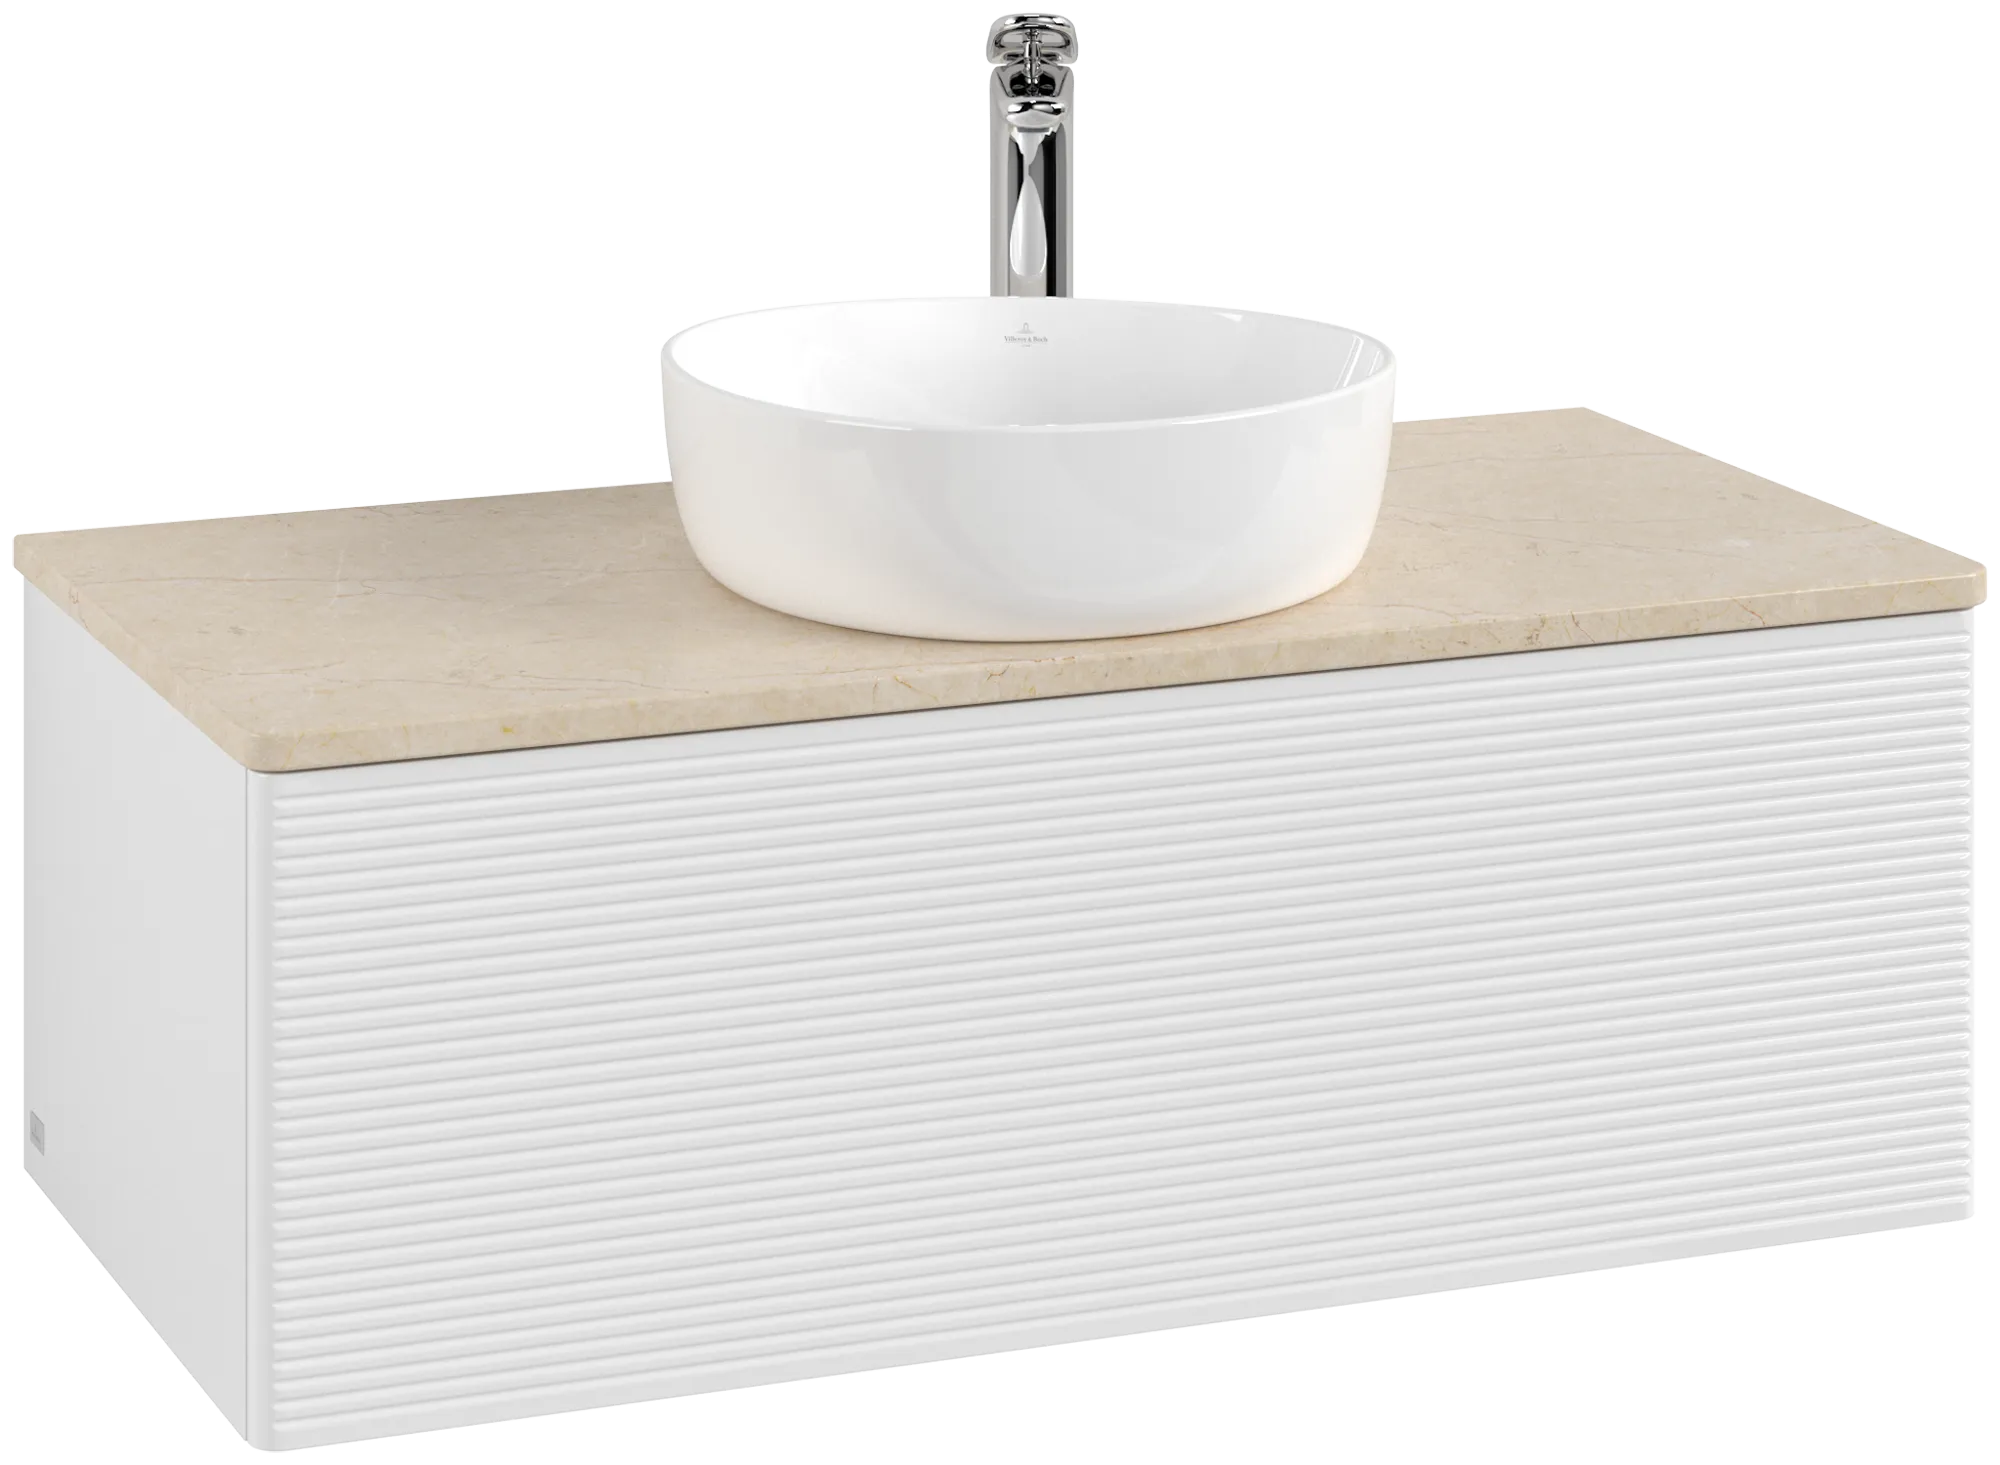 Picture of VILLEROY BOCH Antao Vanity unit, with lighting, 1 pull-out compartment, 1000 x 360 x 500 mm, Front with grain texture, Glossy White Lacquer / Botticino #L31153GF